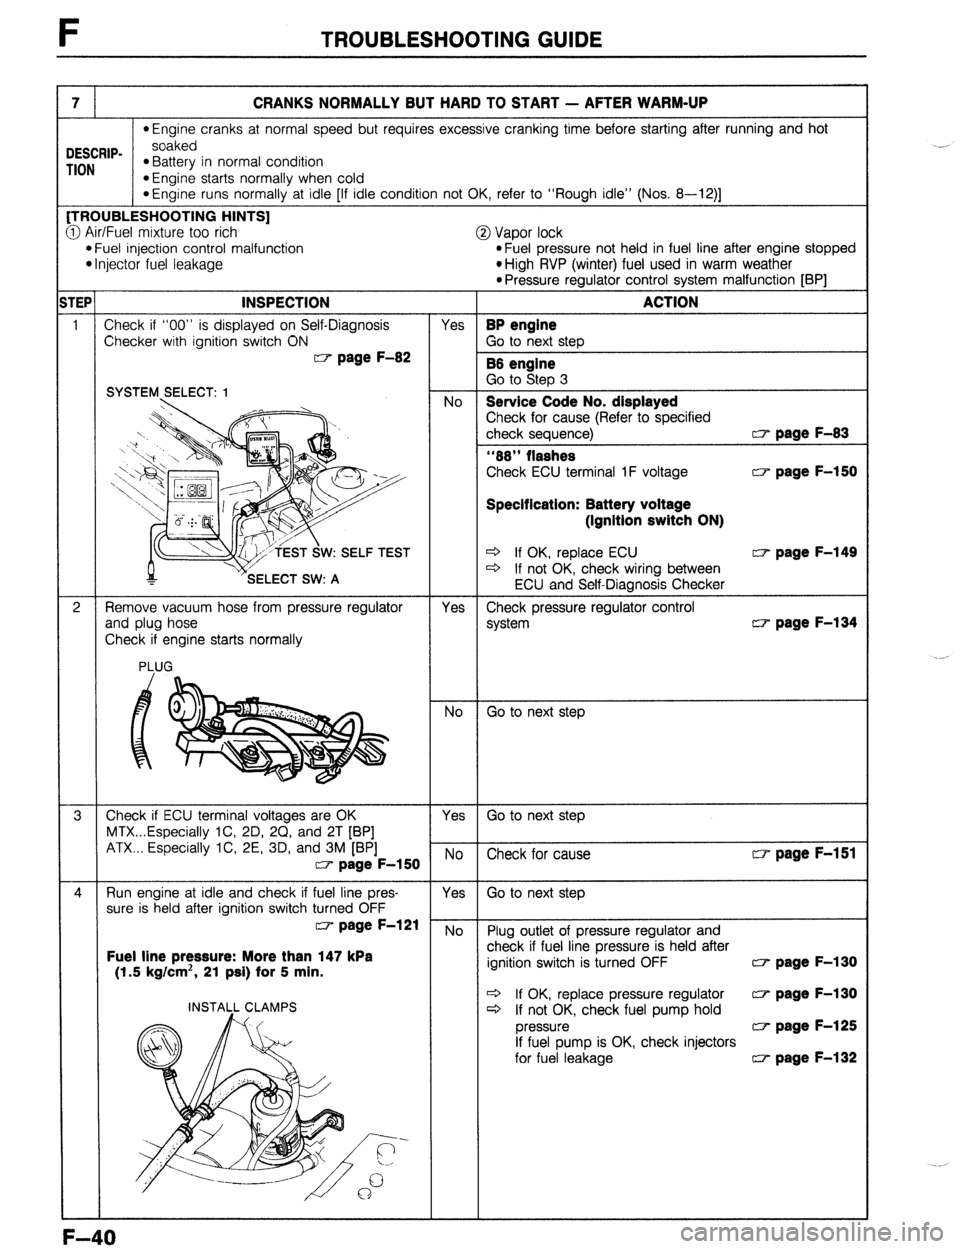 MAZDA PROTEGE 1992  Workshop Manual F TROUBLESHOOTING GUIDE 
7 CRANKS NORMALLY BUT HARD TO START - AFTER WARM-UP 
*Engine cranks at normal speed but requires excessive cranking time before starting after running and hot 
DESCRIP- soaked